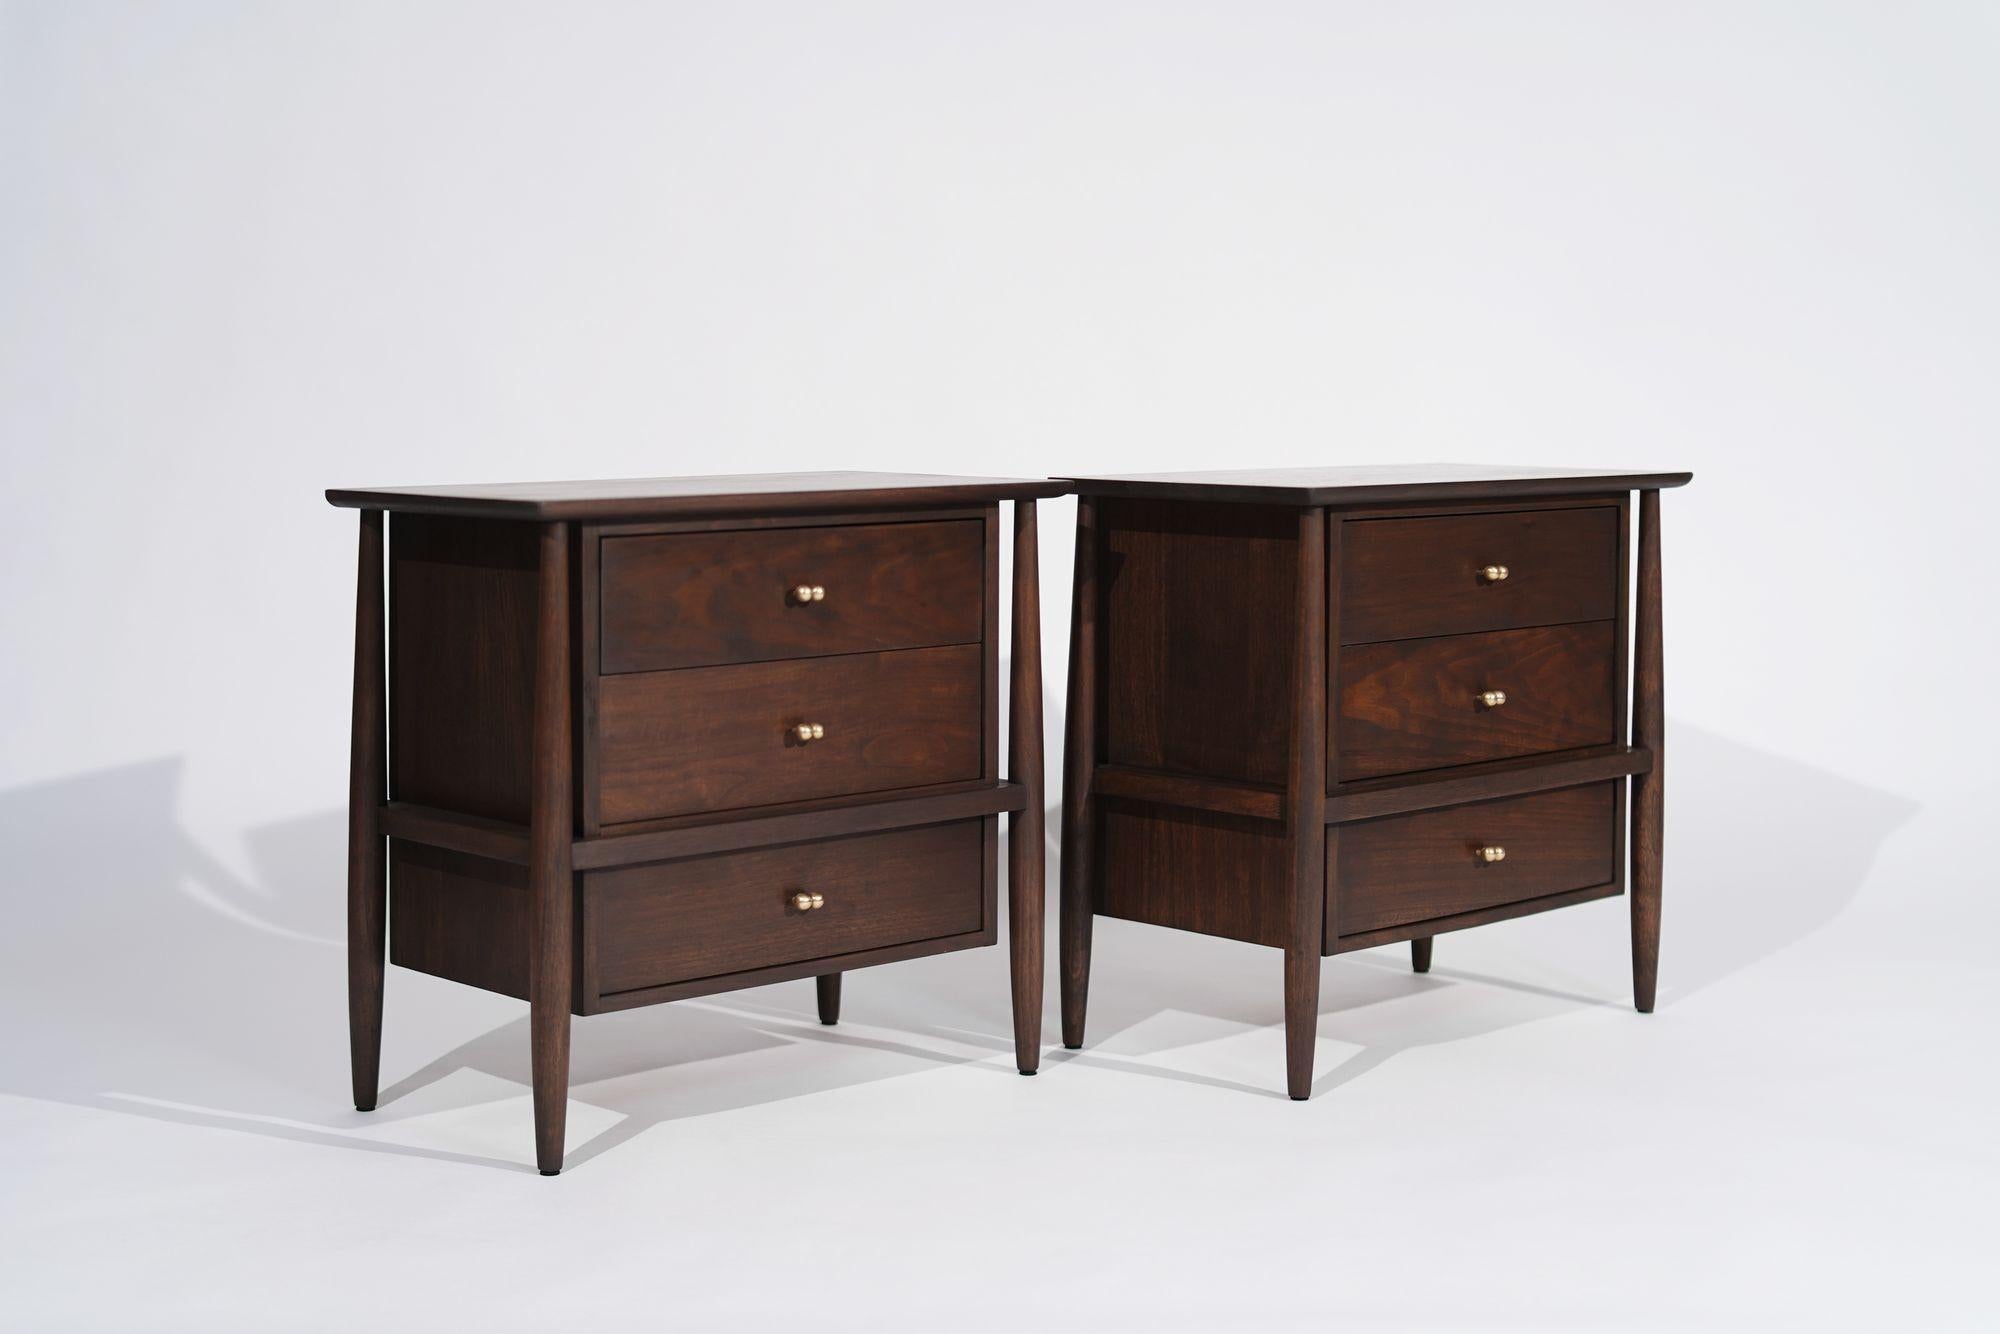 Exposed Framework Bedside Tables in Walnut by John Stuart, C. 1950s In Excellent Condition For Sale In Westport, CT